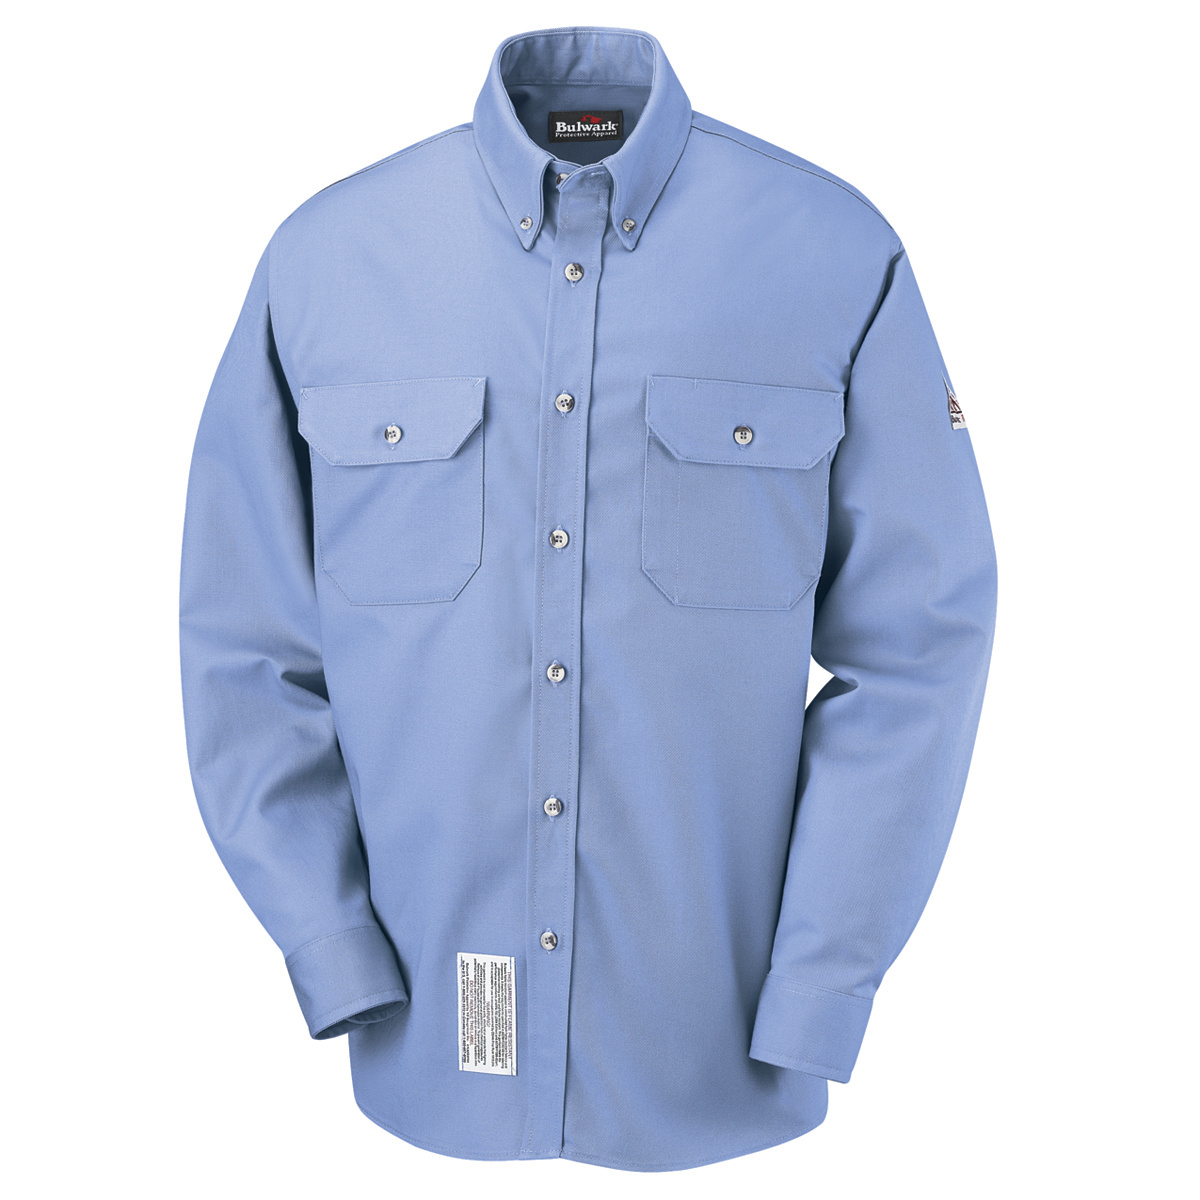 Bulwark® Large Tall Light Blue Westex Ultrasoft®/Cotton/Nylon Flame Resistant Dress Shirt With Button Front Closure